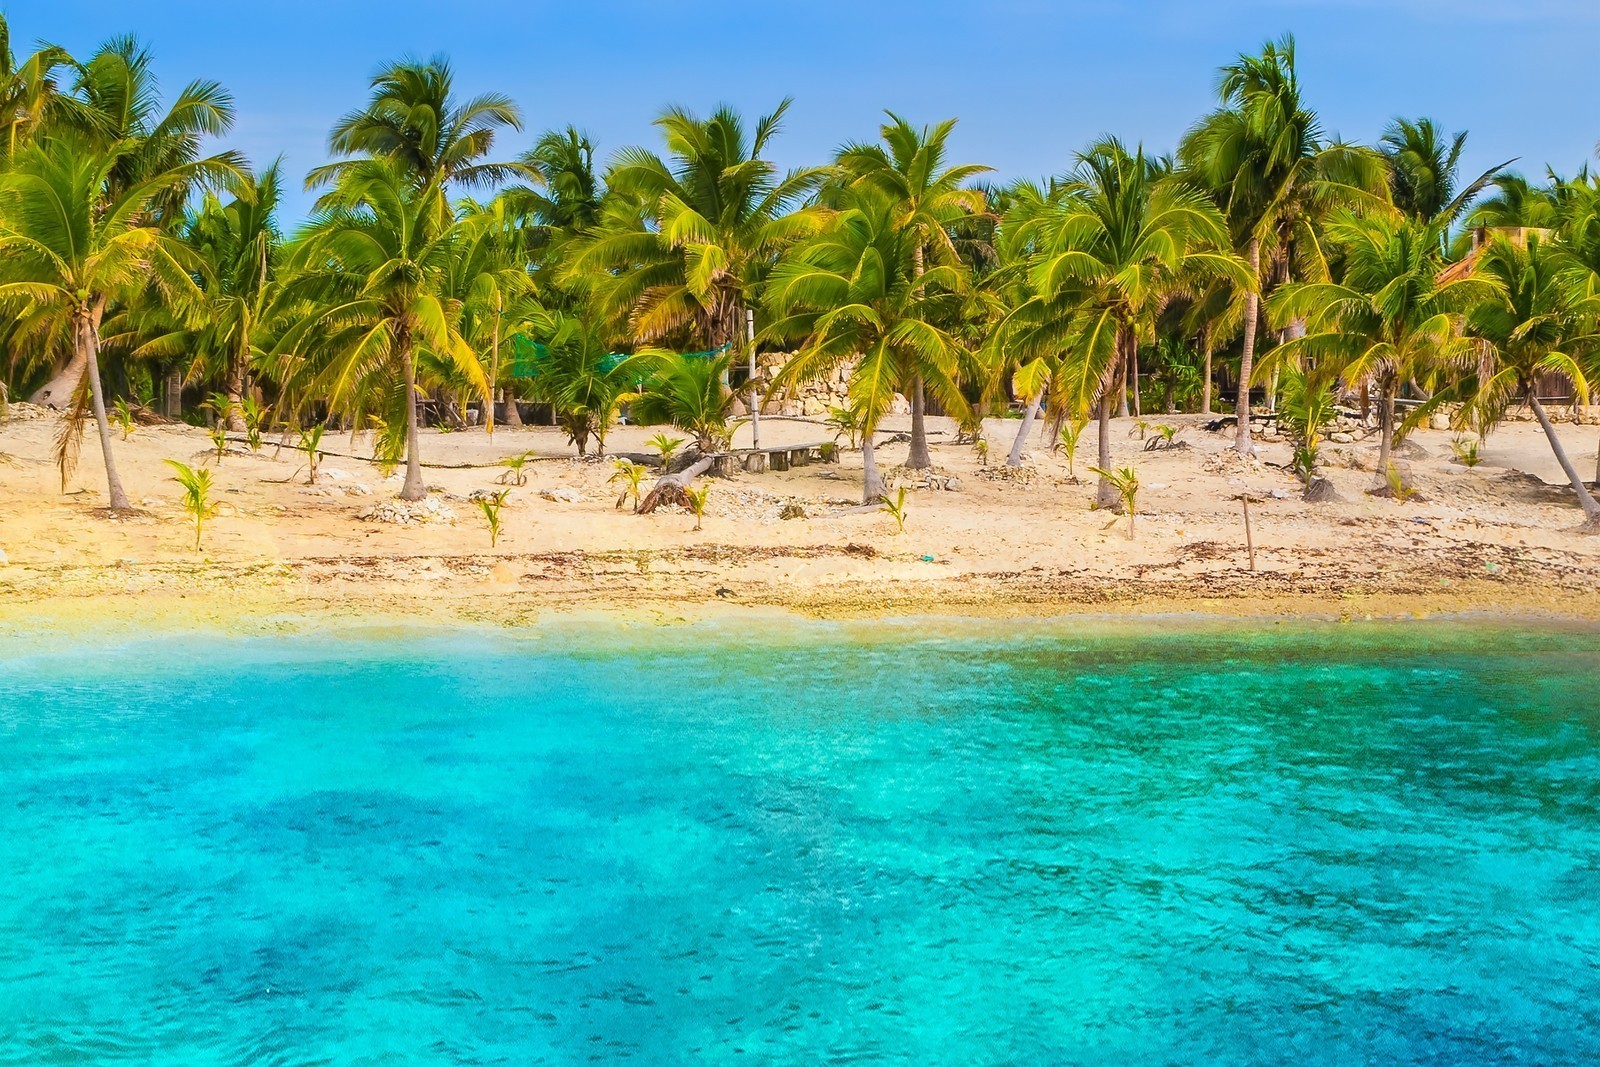 nature, Beach, Tropical, Sea, Palm Trees, Sand, Turquoise, Water, Landscape, Summer, Mexico Wallpaper